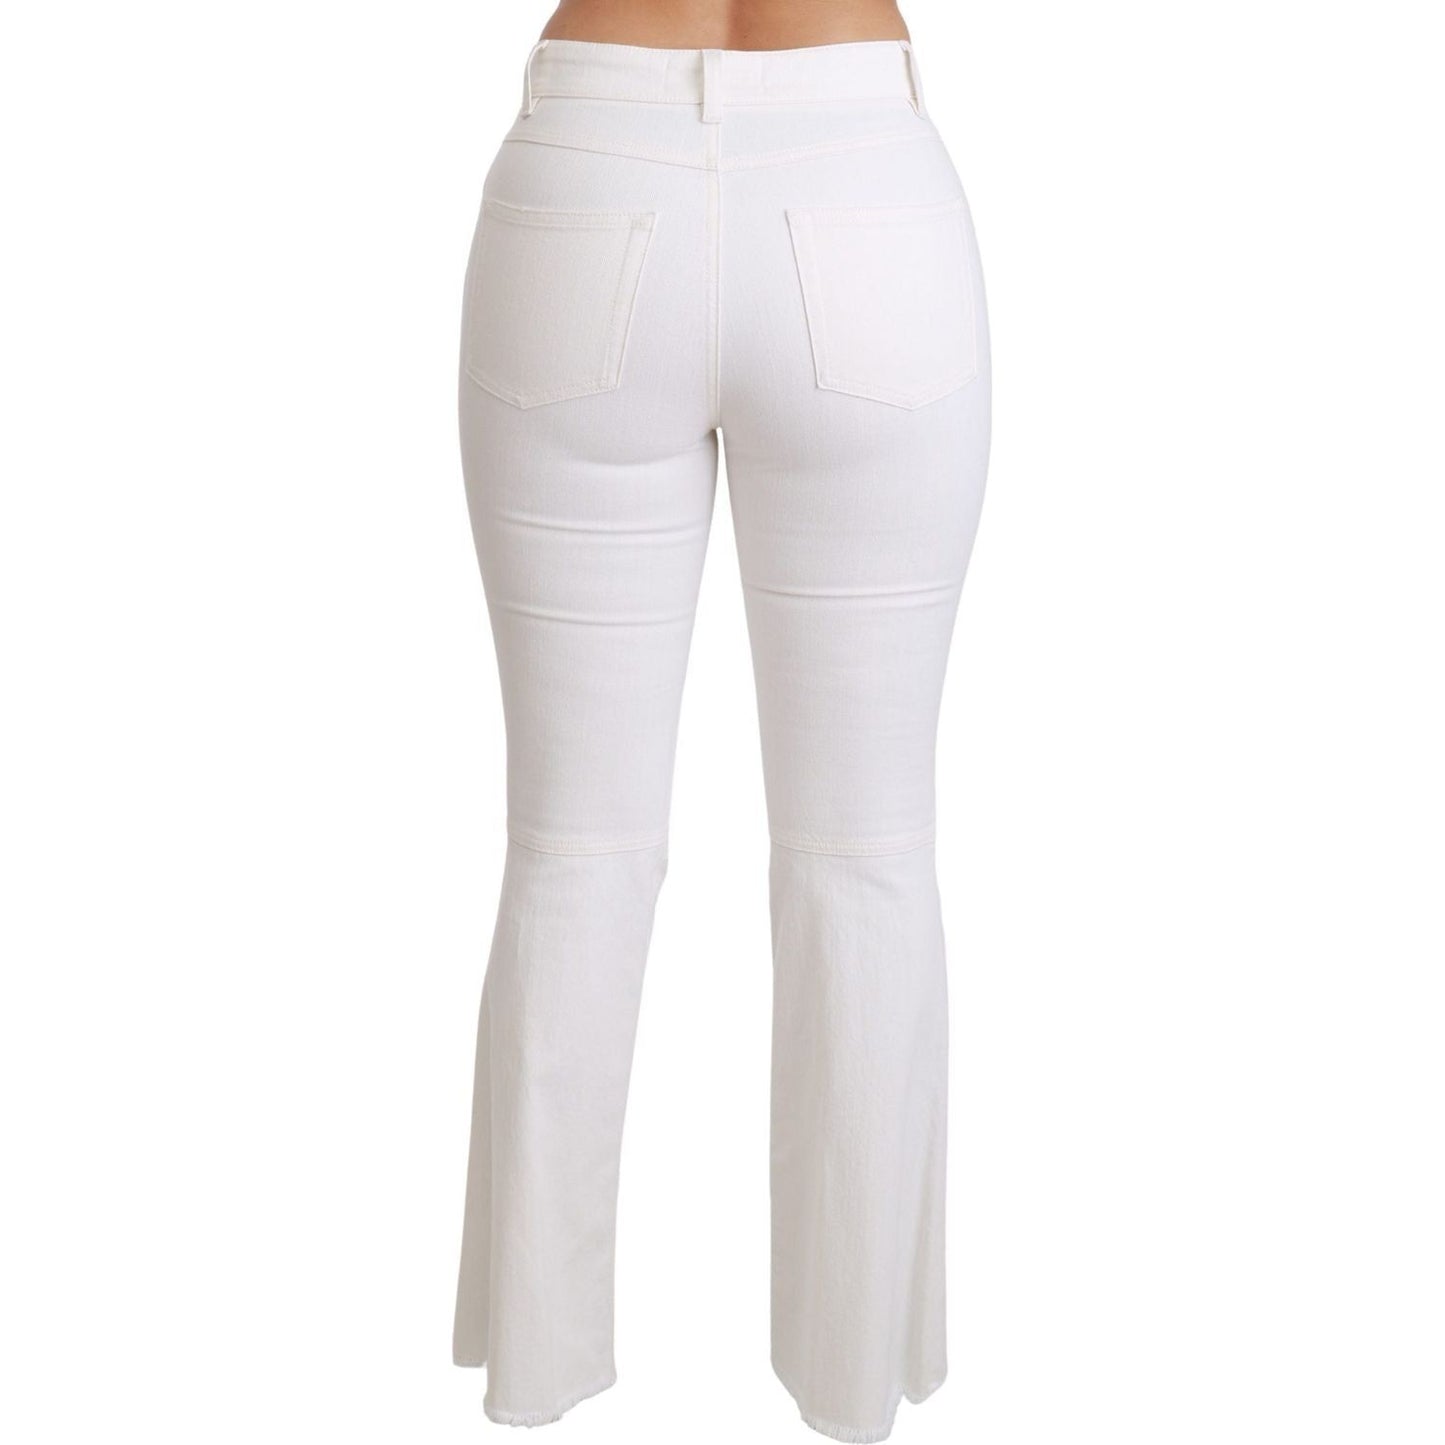 Dolce & Gabbana Chic Flared Mid Waist Embroidered Pants white-heart-flared-stretch-cotton-pants